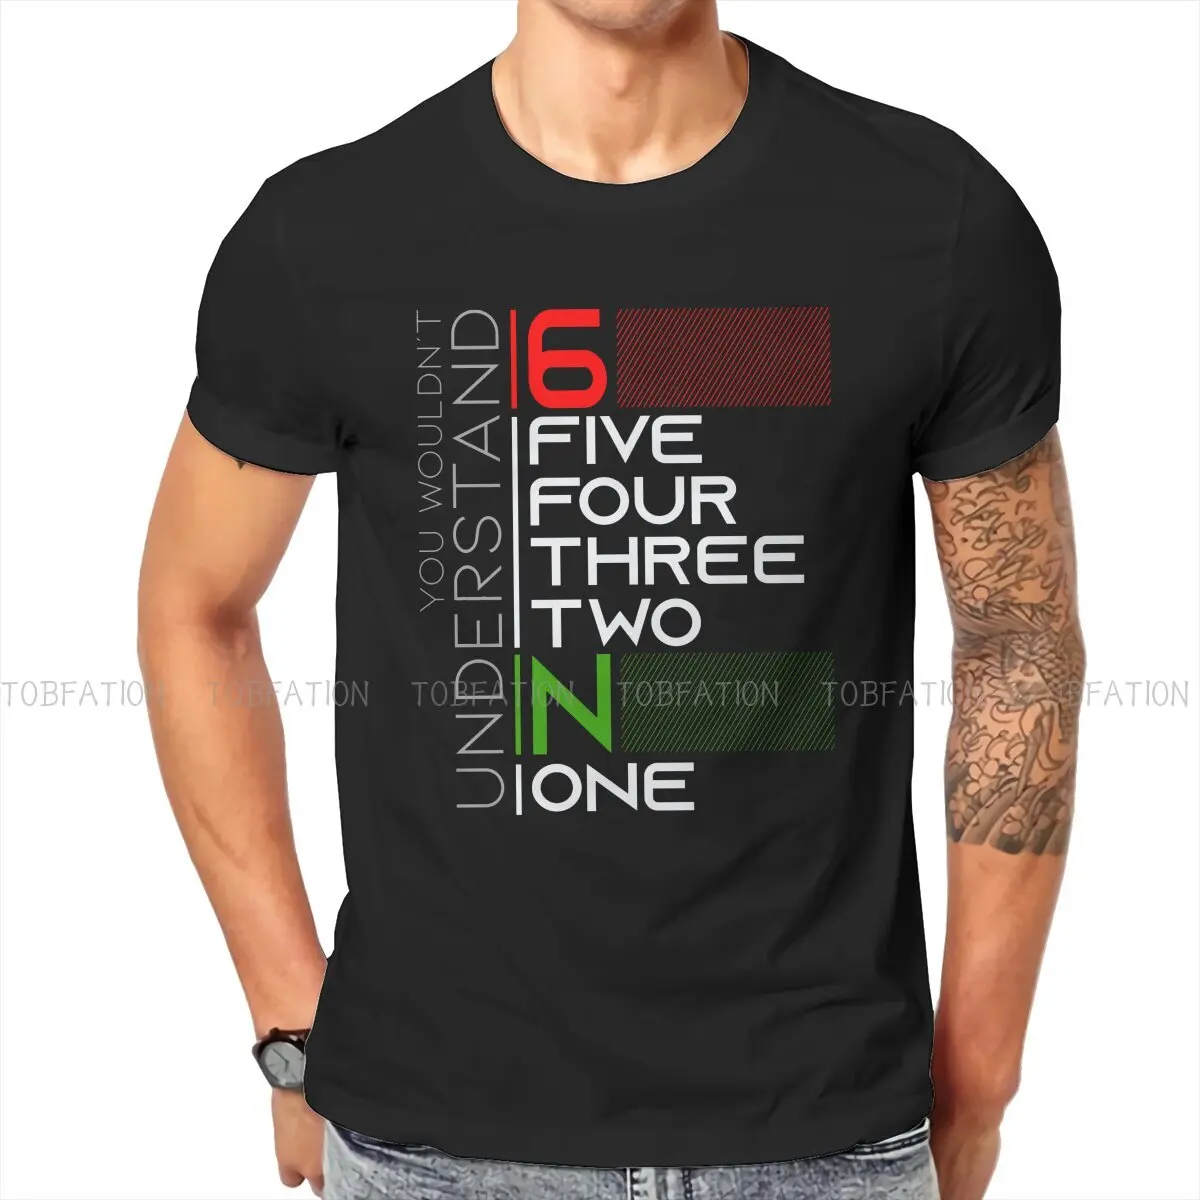 

65432N1 You Wouldn't Understand Special TShirt Enduro Cross Motorcycle Racing Leisure T Shirt Hot Sale Stuff For Men Women